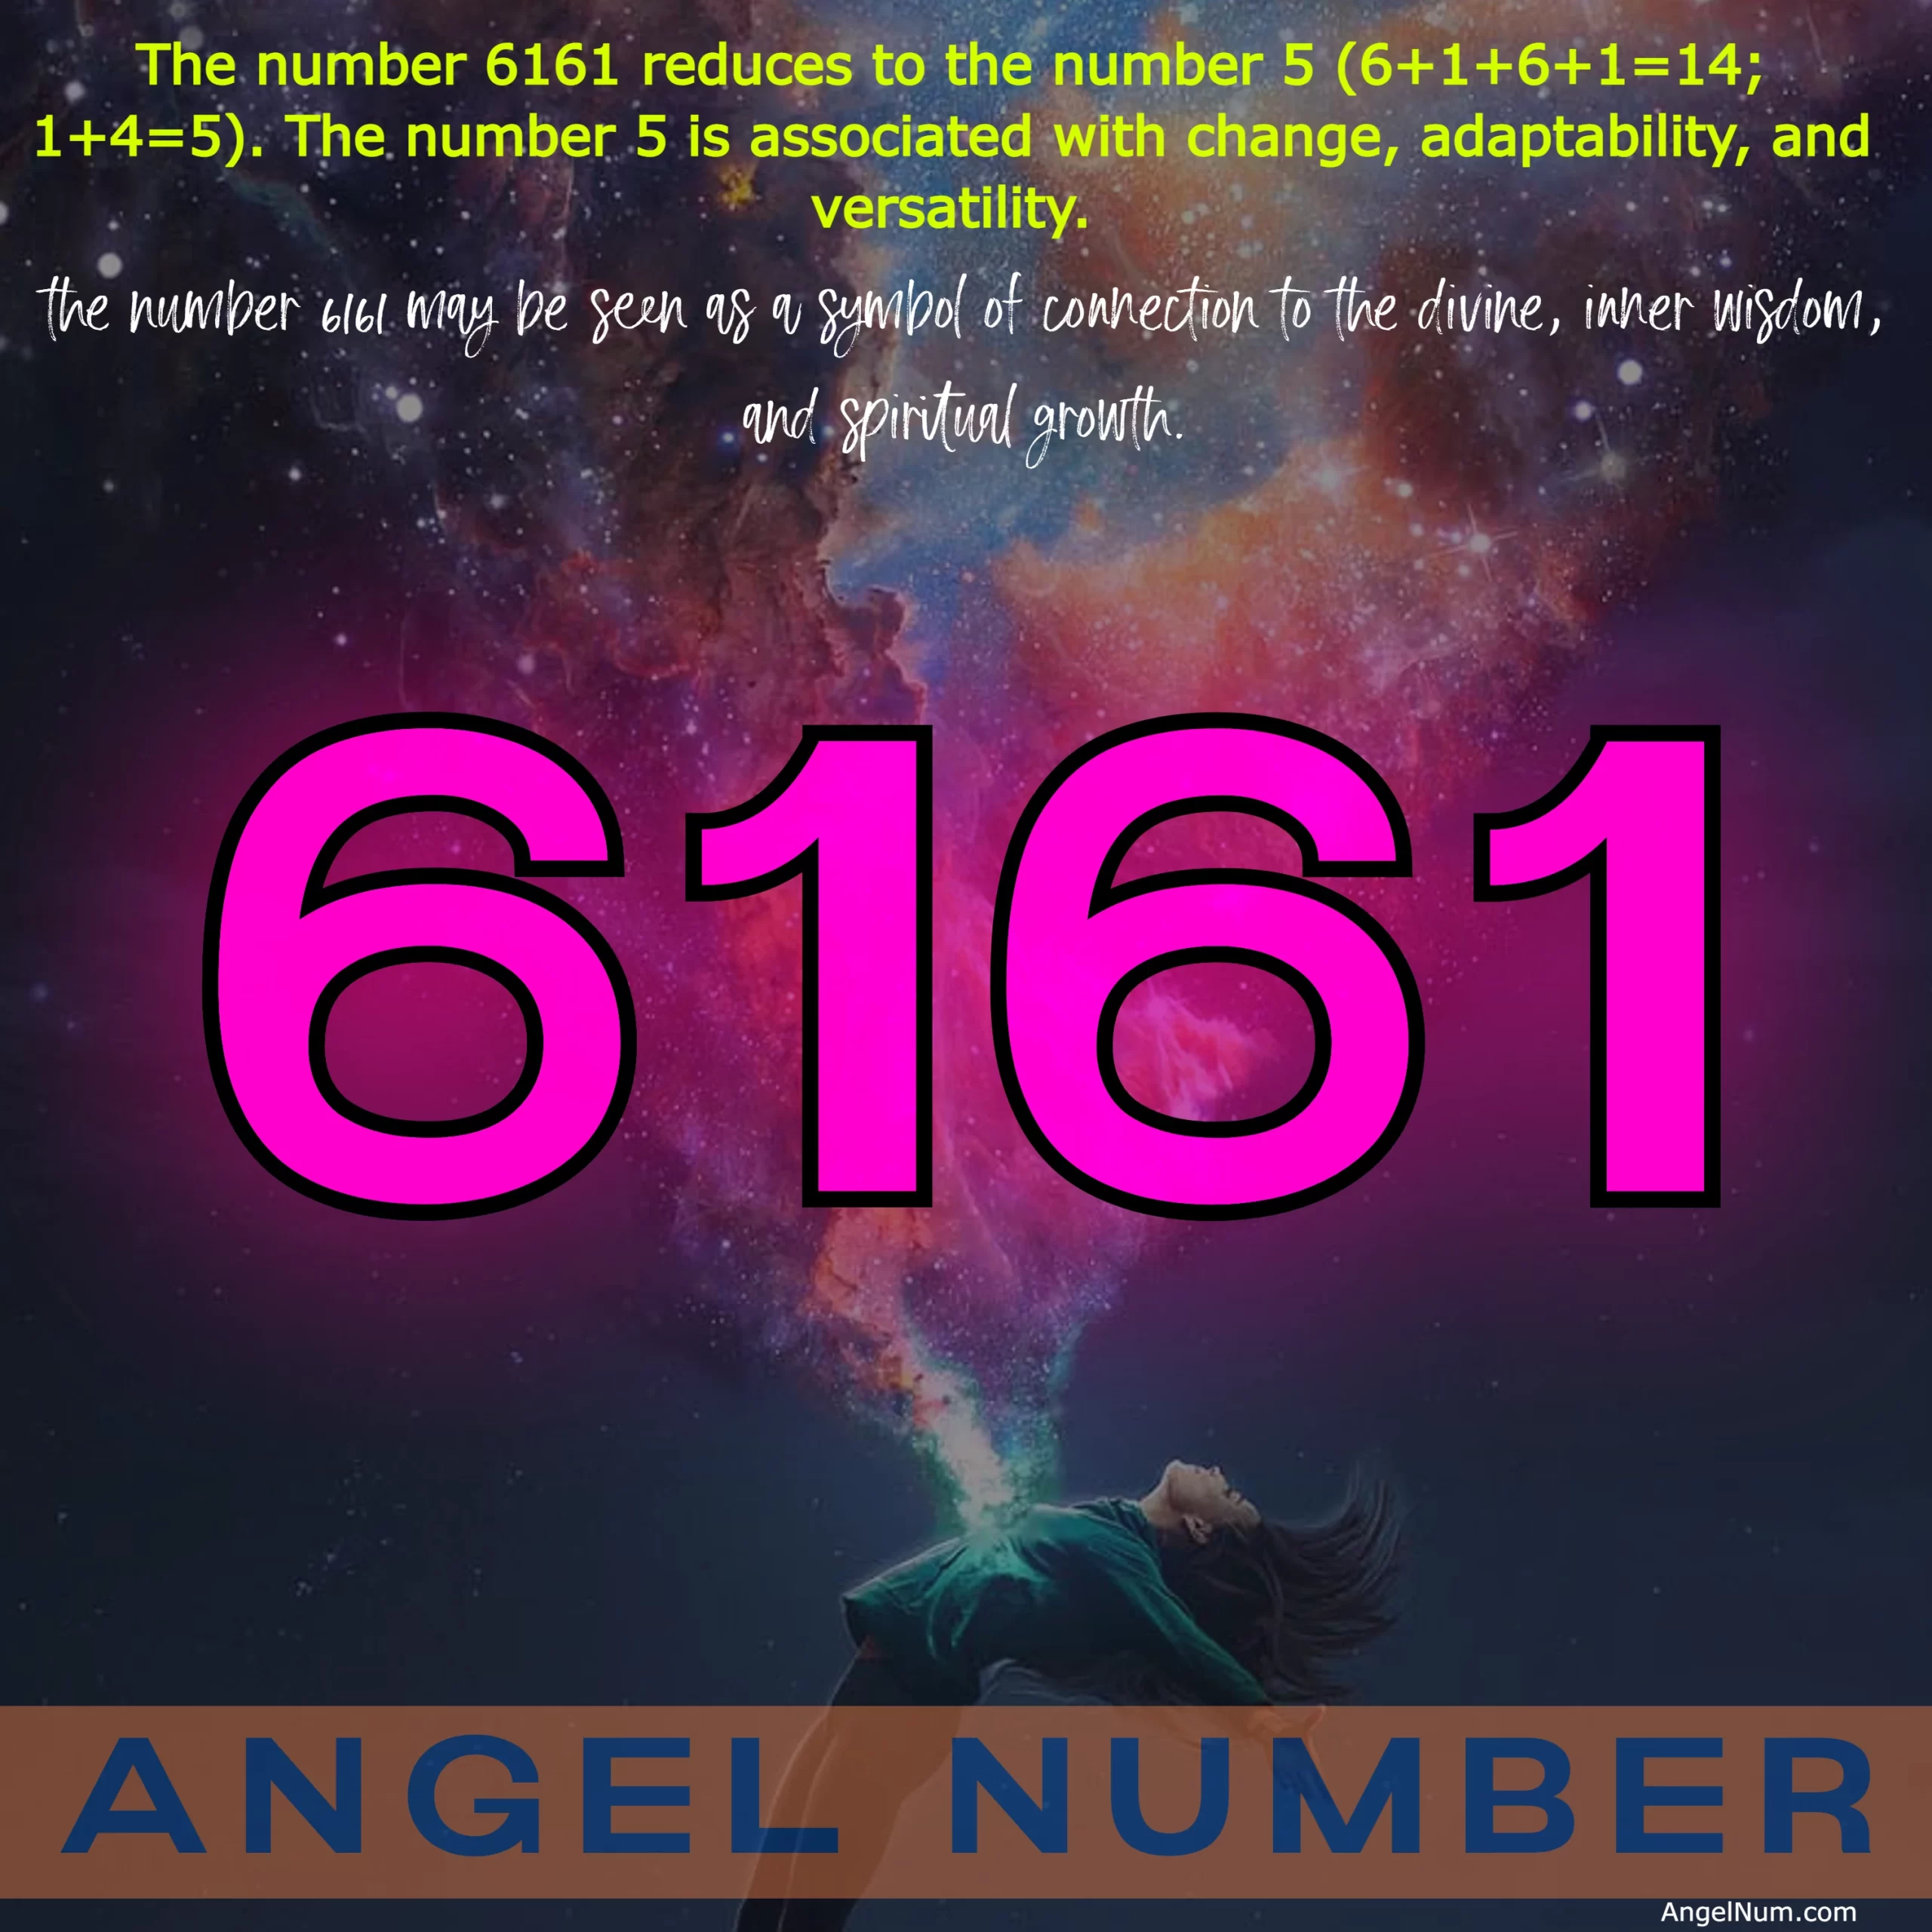 Angel Number 6161: The Spiritual Significance and Meaning